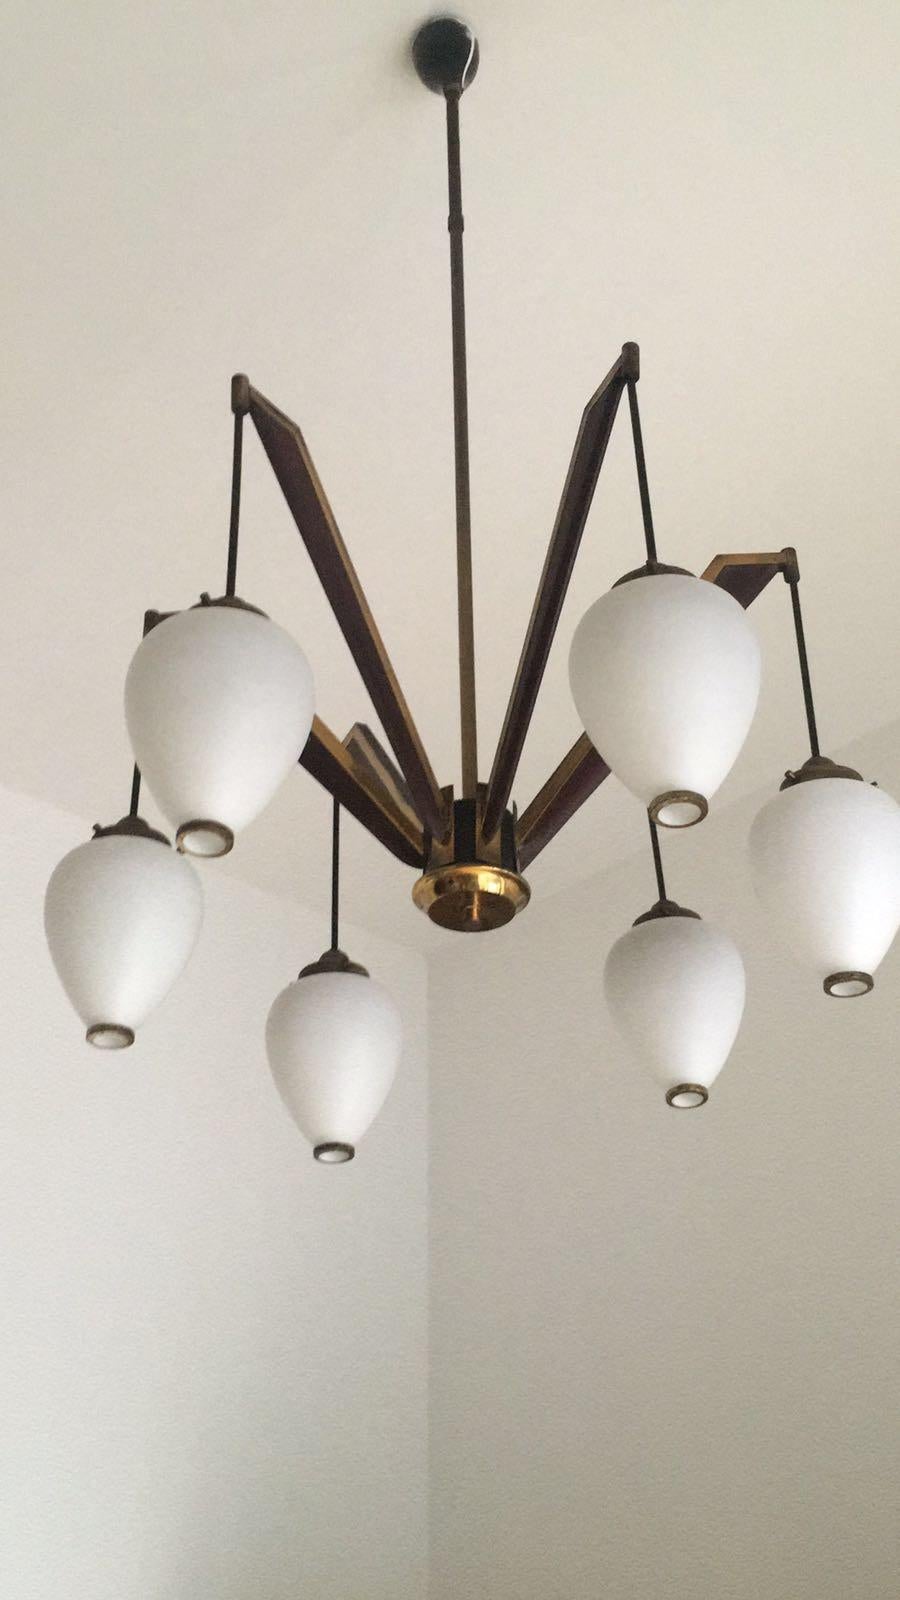 20th Century Italian Vintage Brass and Opaline Glass Chandelier from Arredoluce Monza, 1950s For Sale